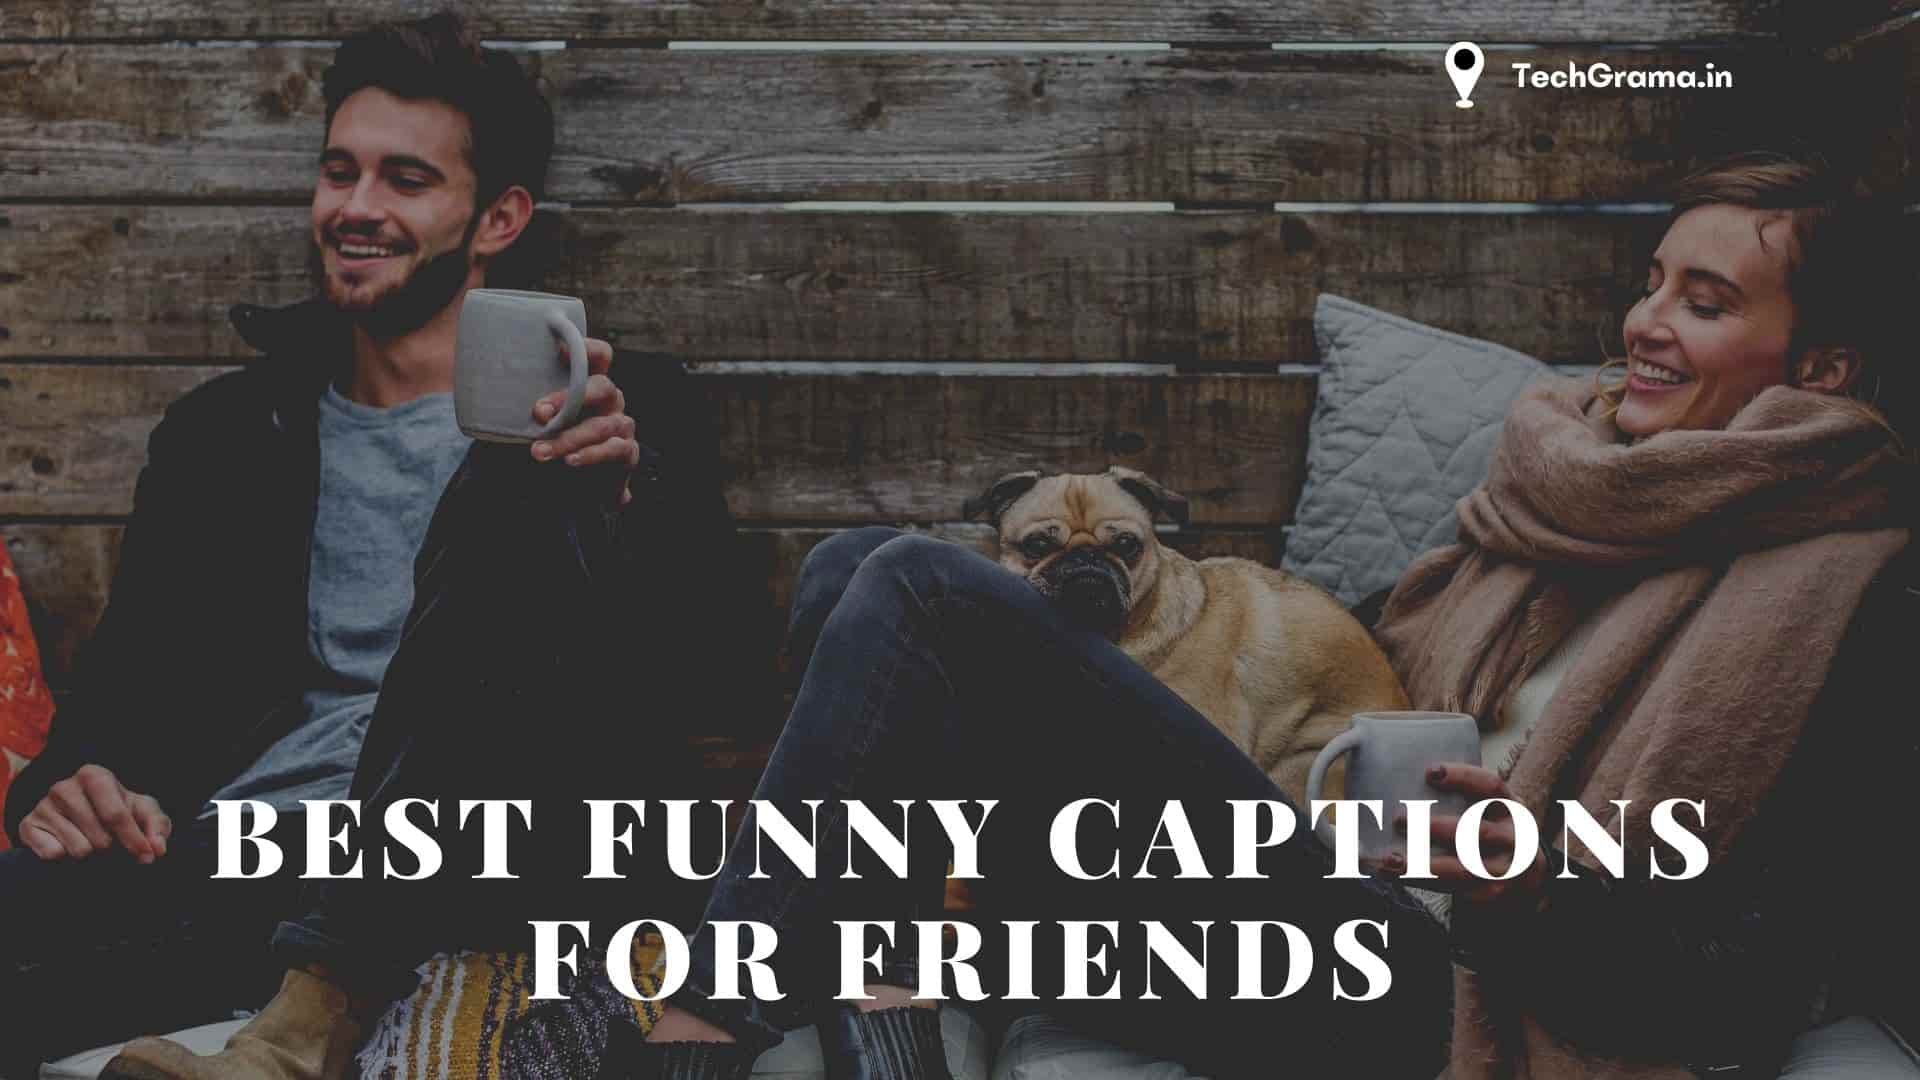 ▷ 275+ Best Funny Captions For Friends In 2023 – TechGrama